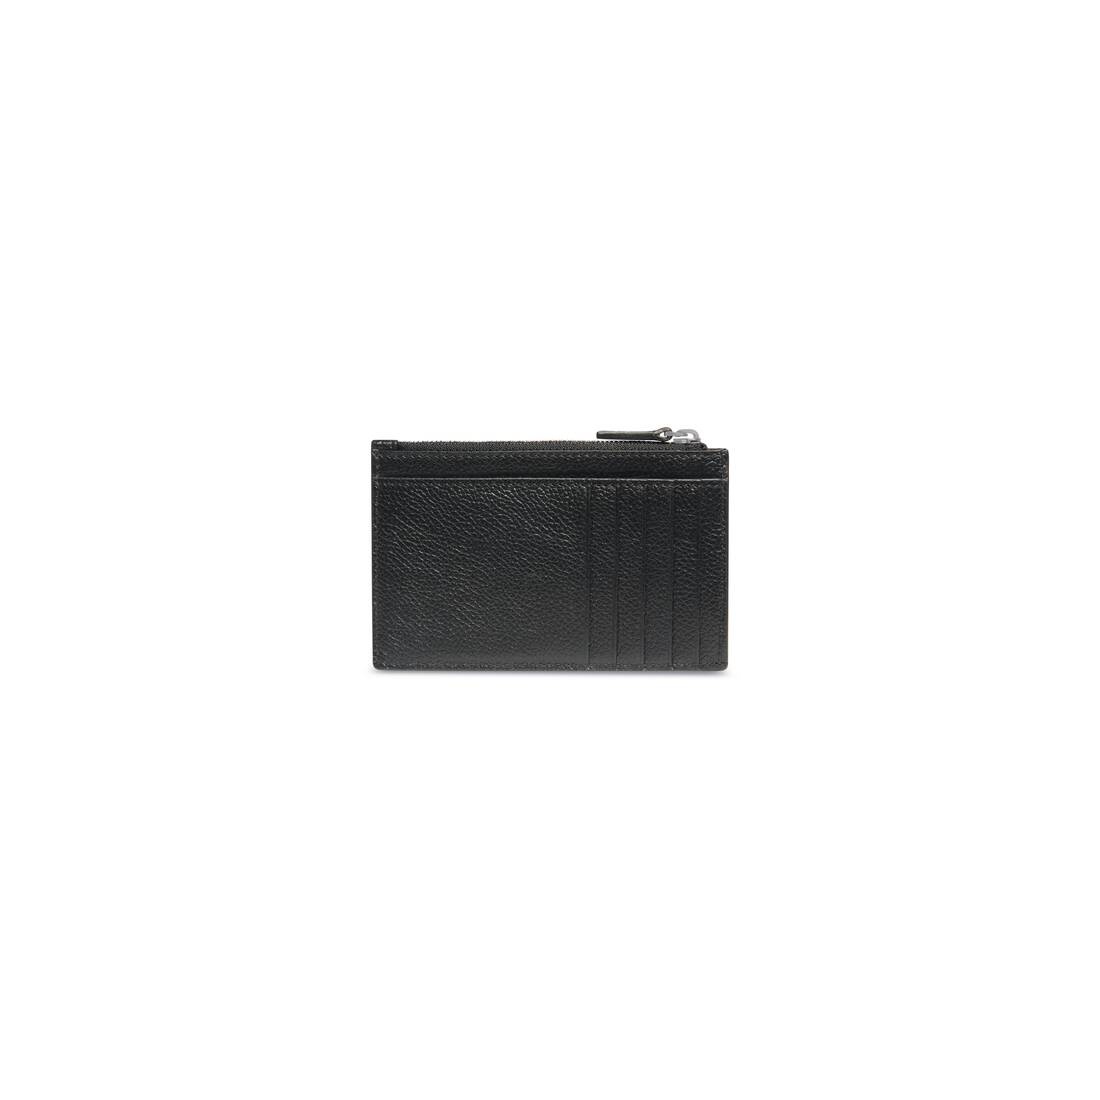 Cash Large Long Coin And Card Holder in Black - 2